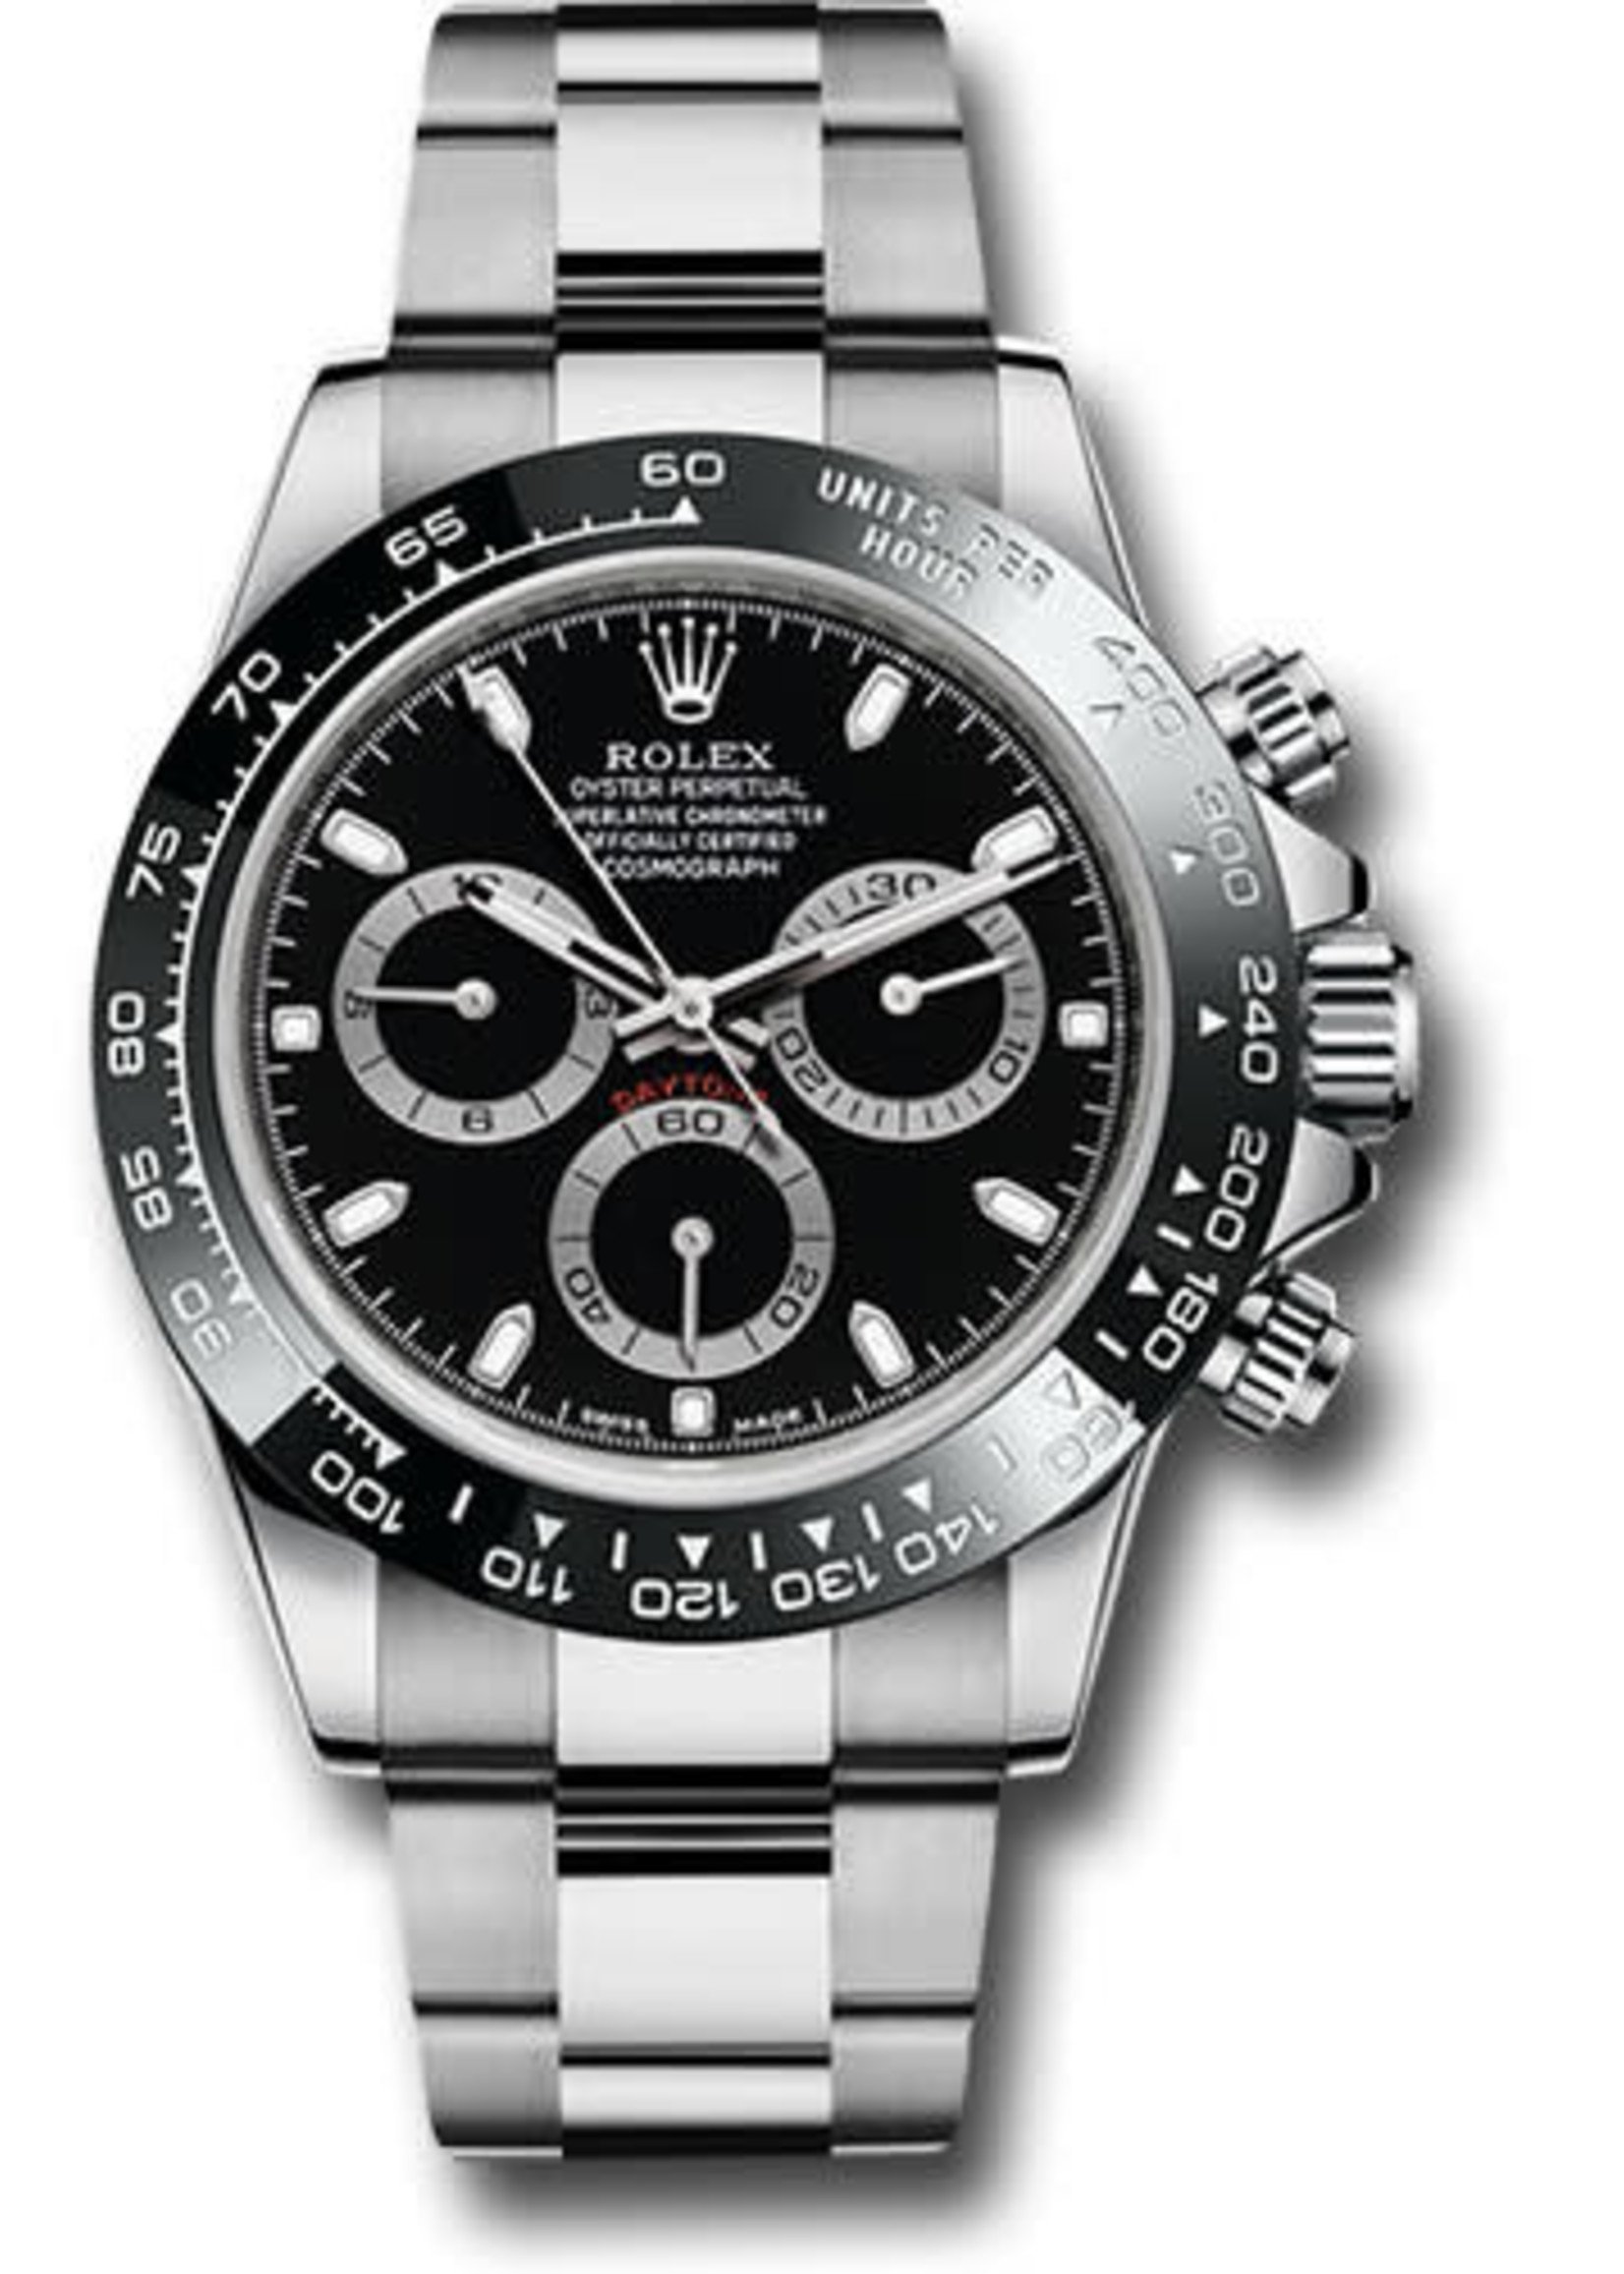 ROLEX DAYTONA 40MM #116500LN (2018 B+P) BY APPOINTMENT ONLY